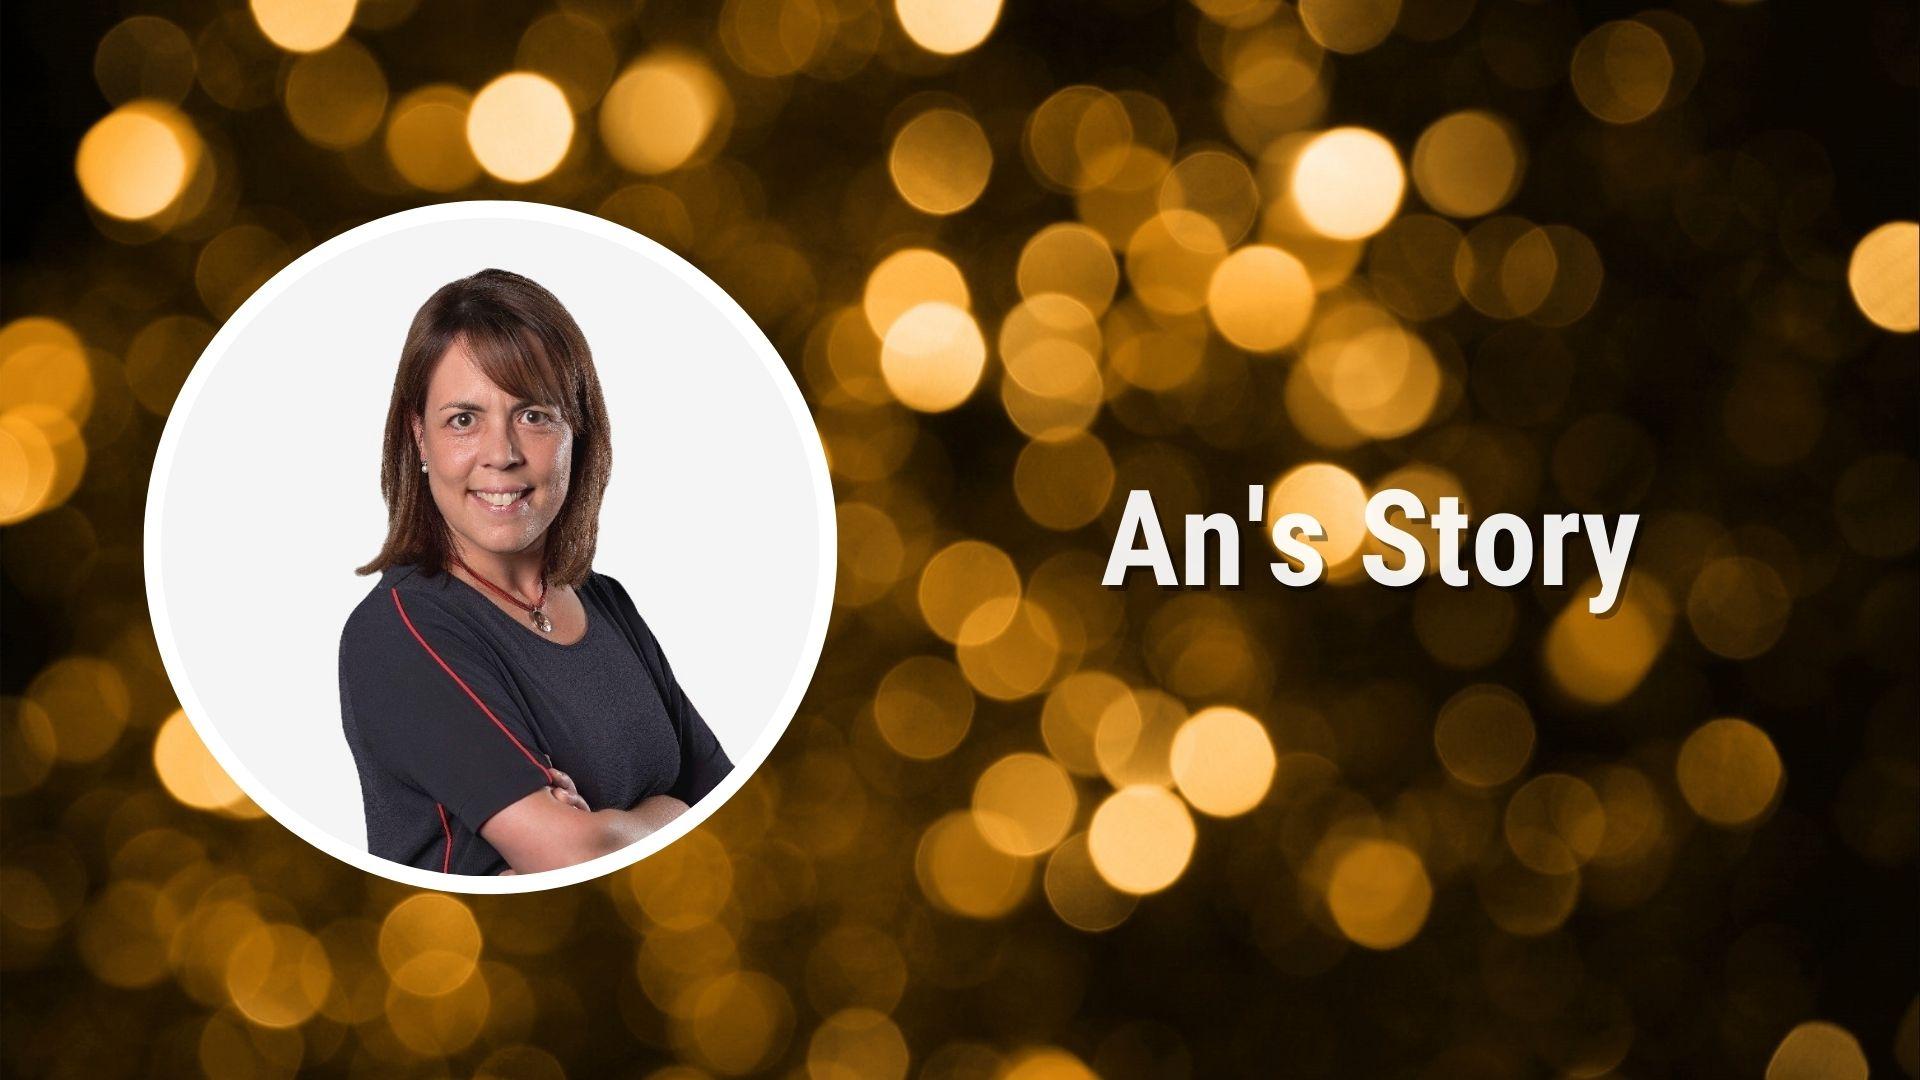 An’s story: Balancing professional growth with well-being